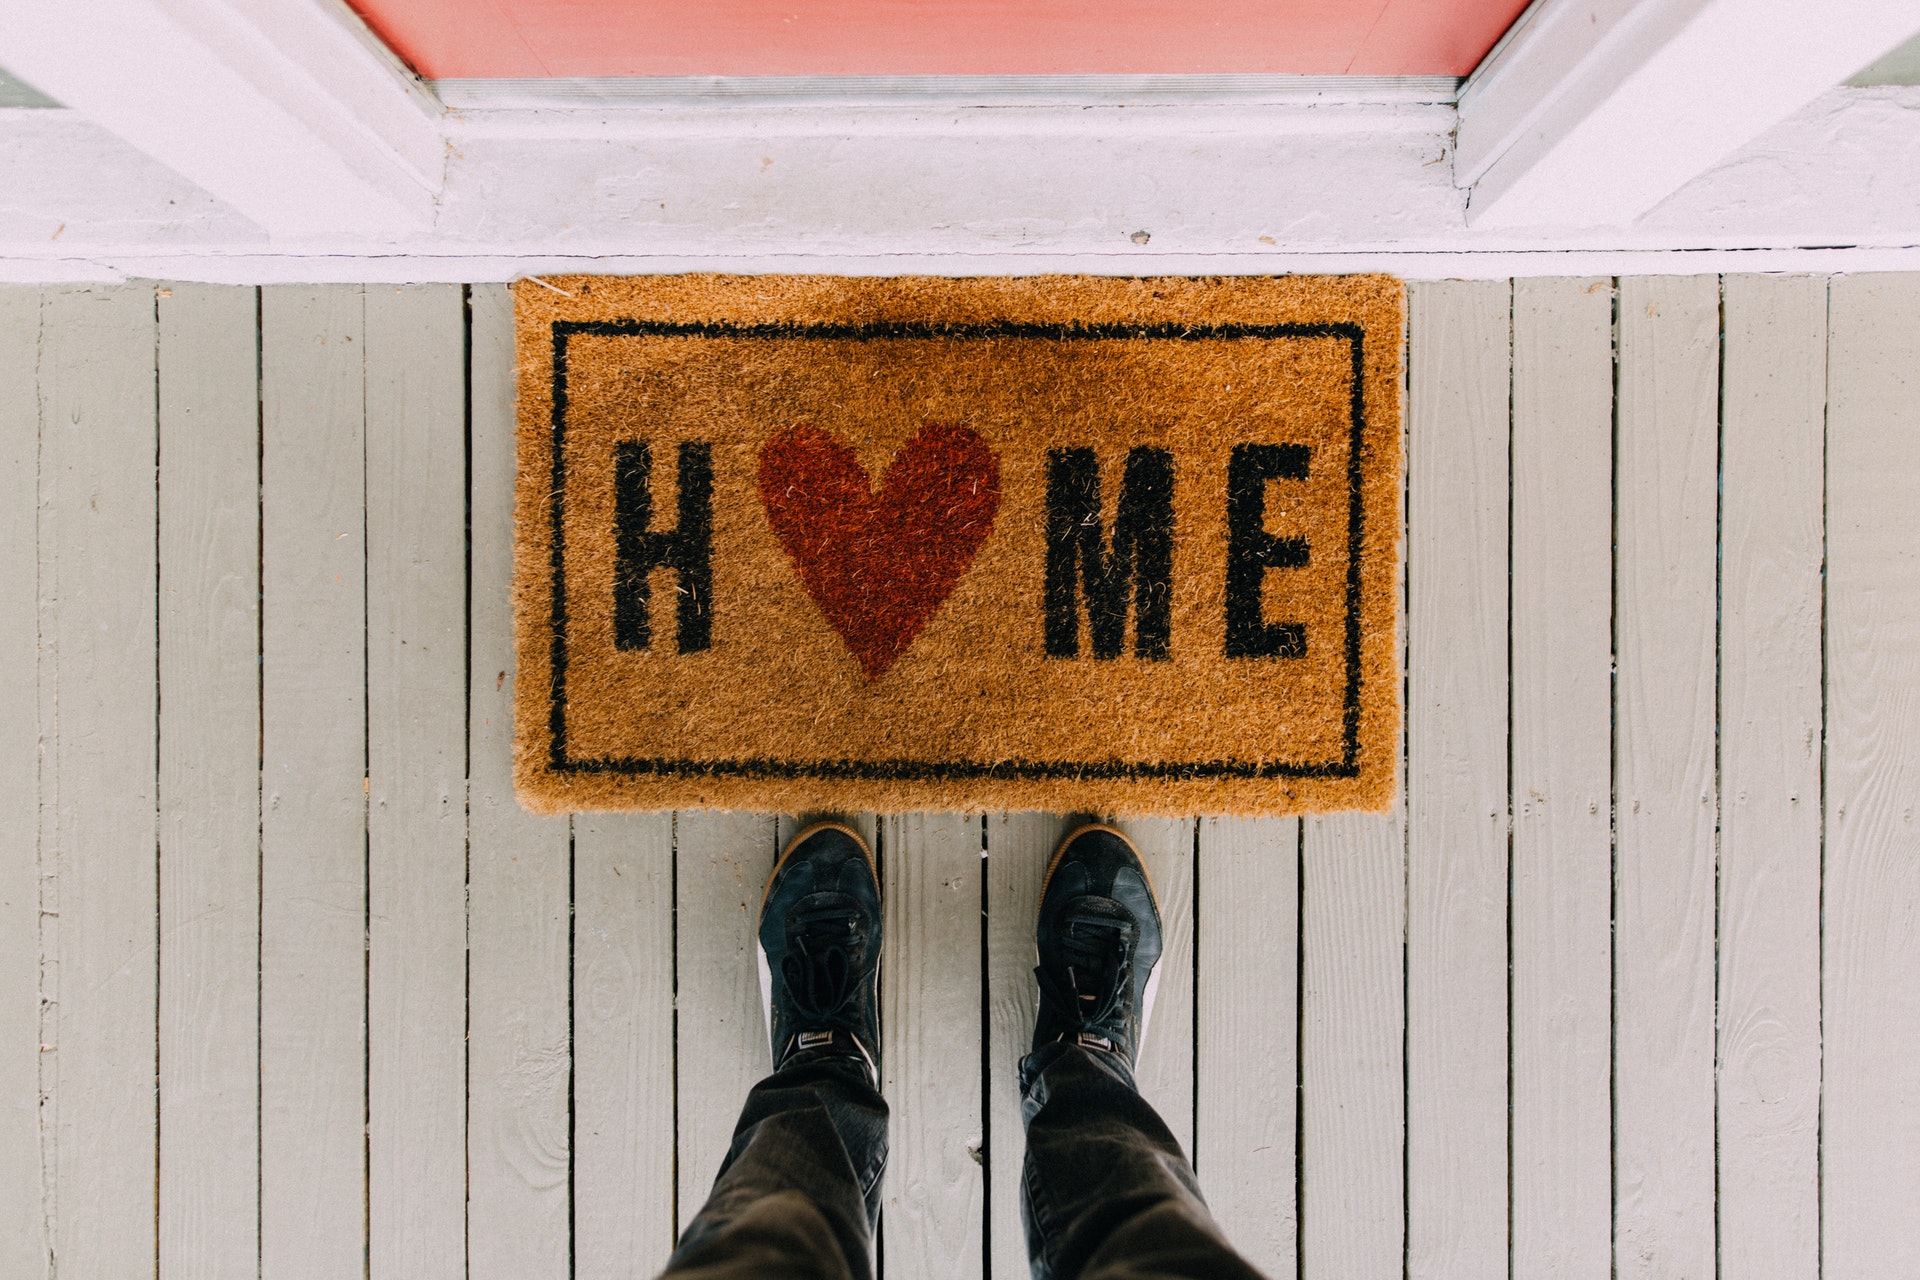 A view of a welcome mat saying HOME on it, with a man's shoes visible in front of it, as if he is taking the photo looking down